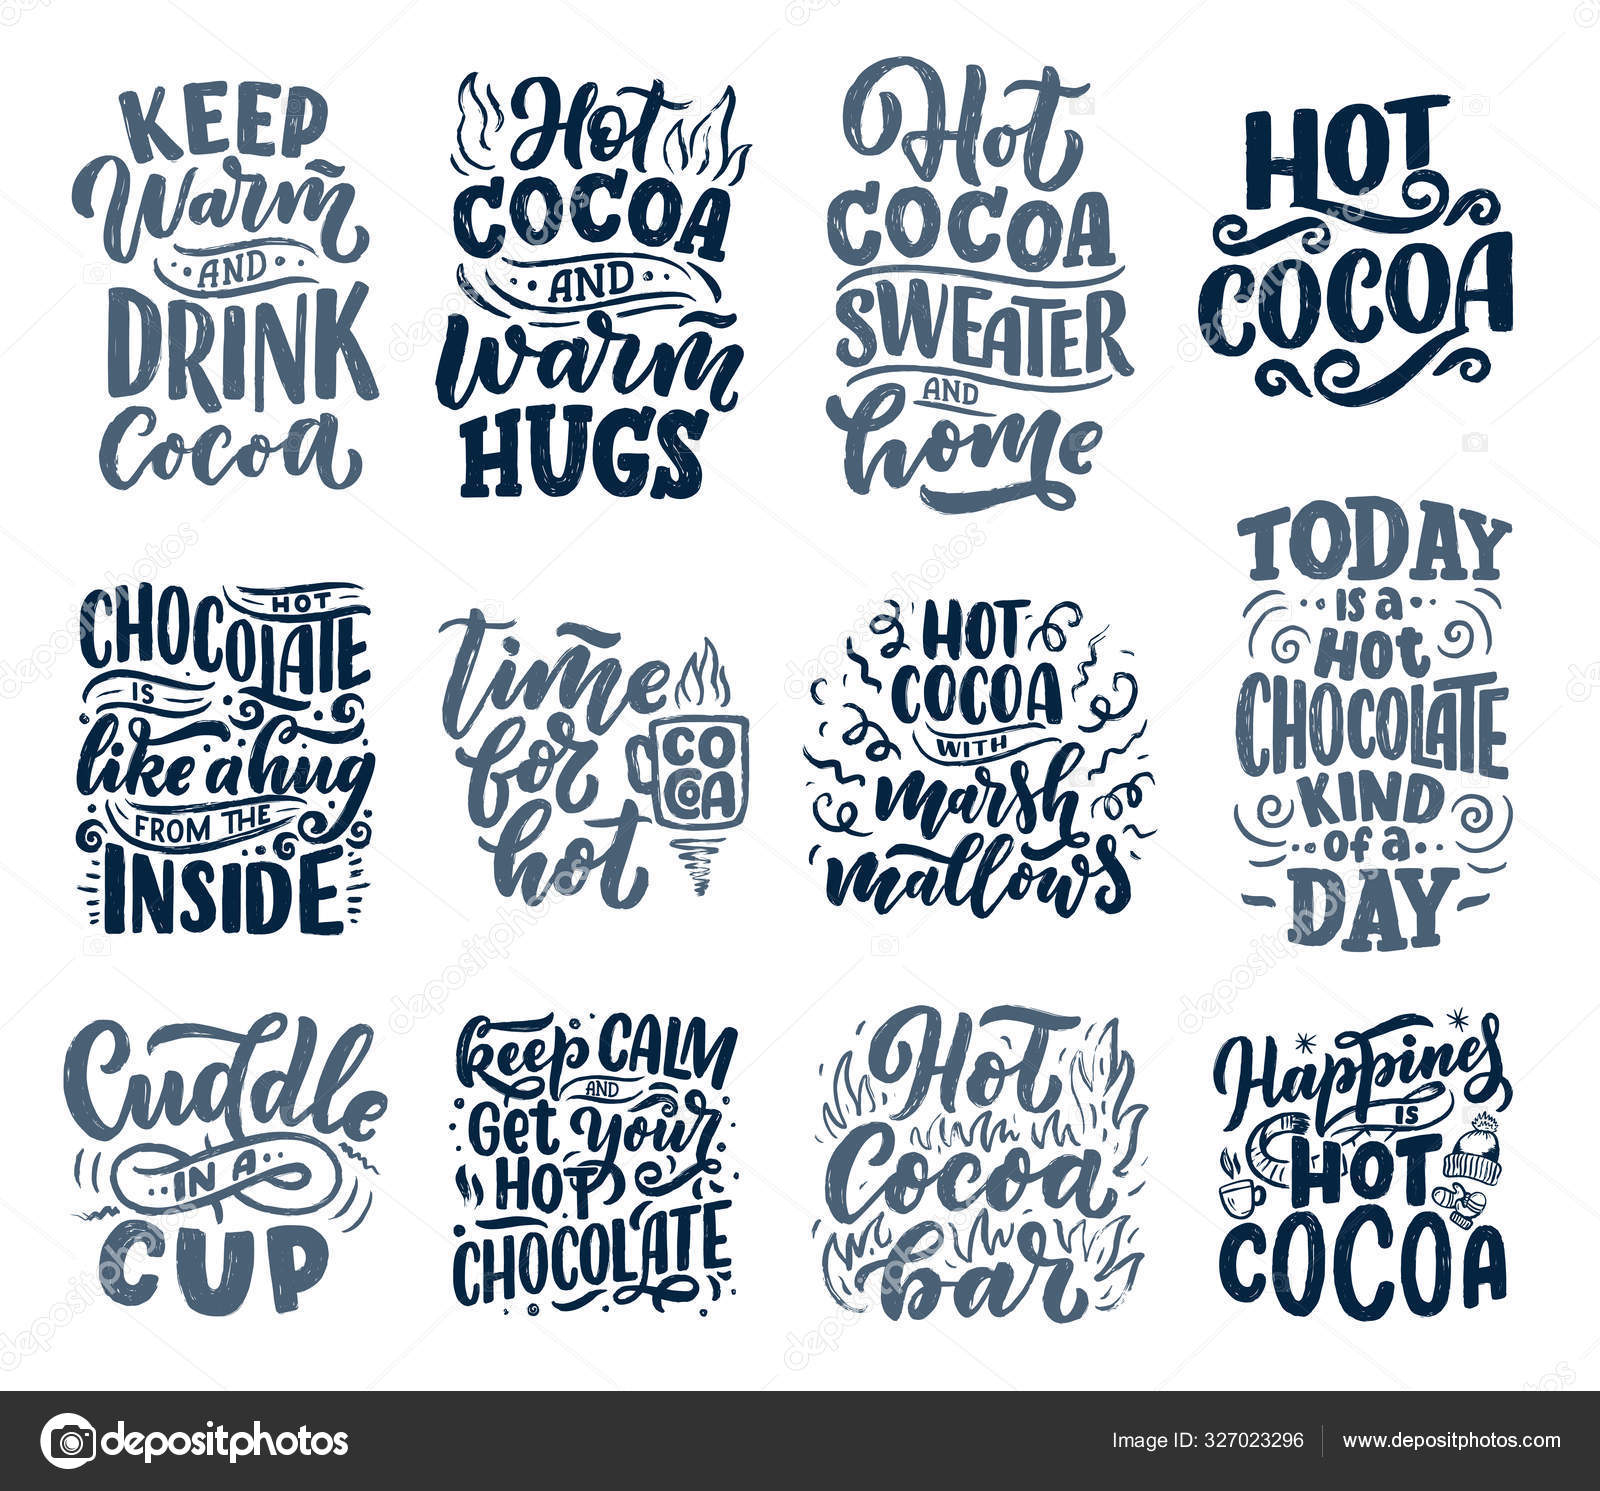 Keep warm - hand lettering celebration quote Vector Image